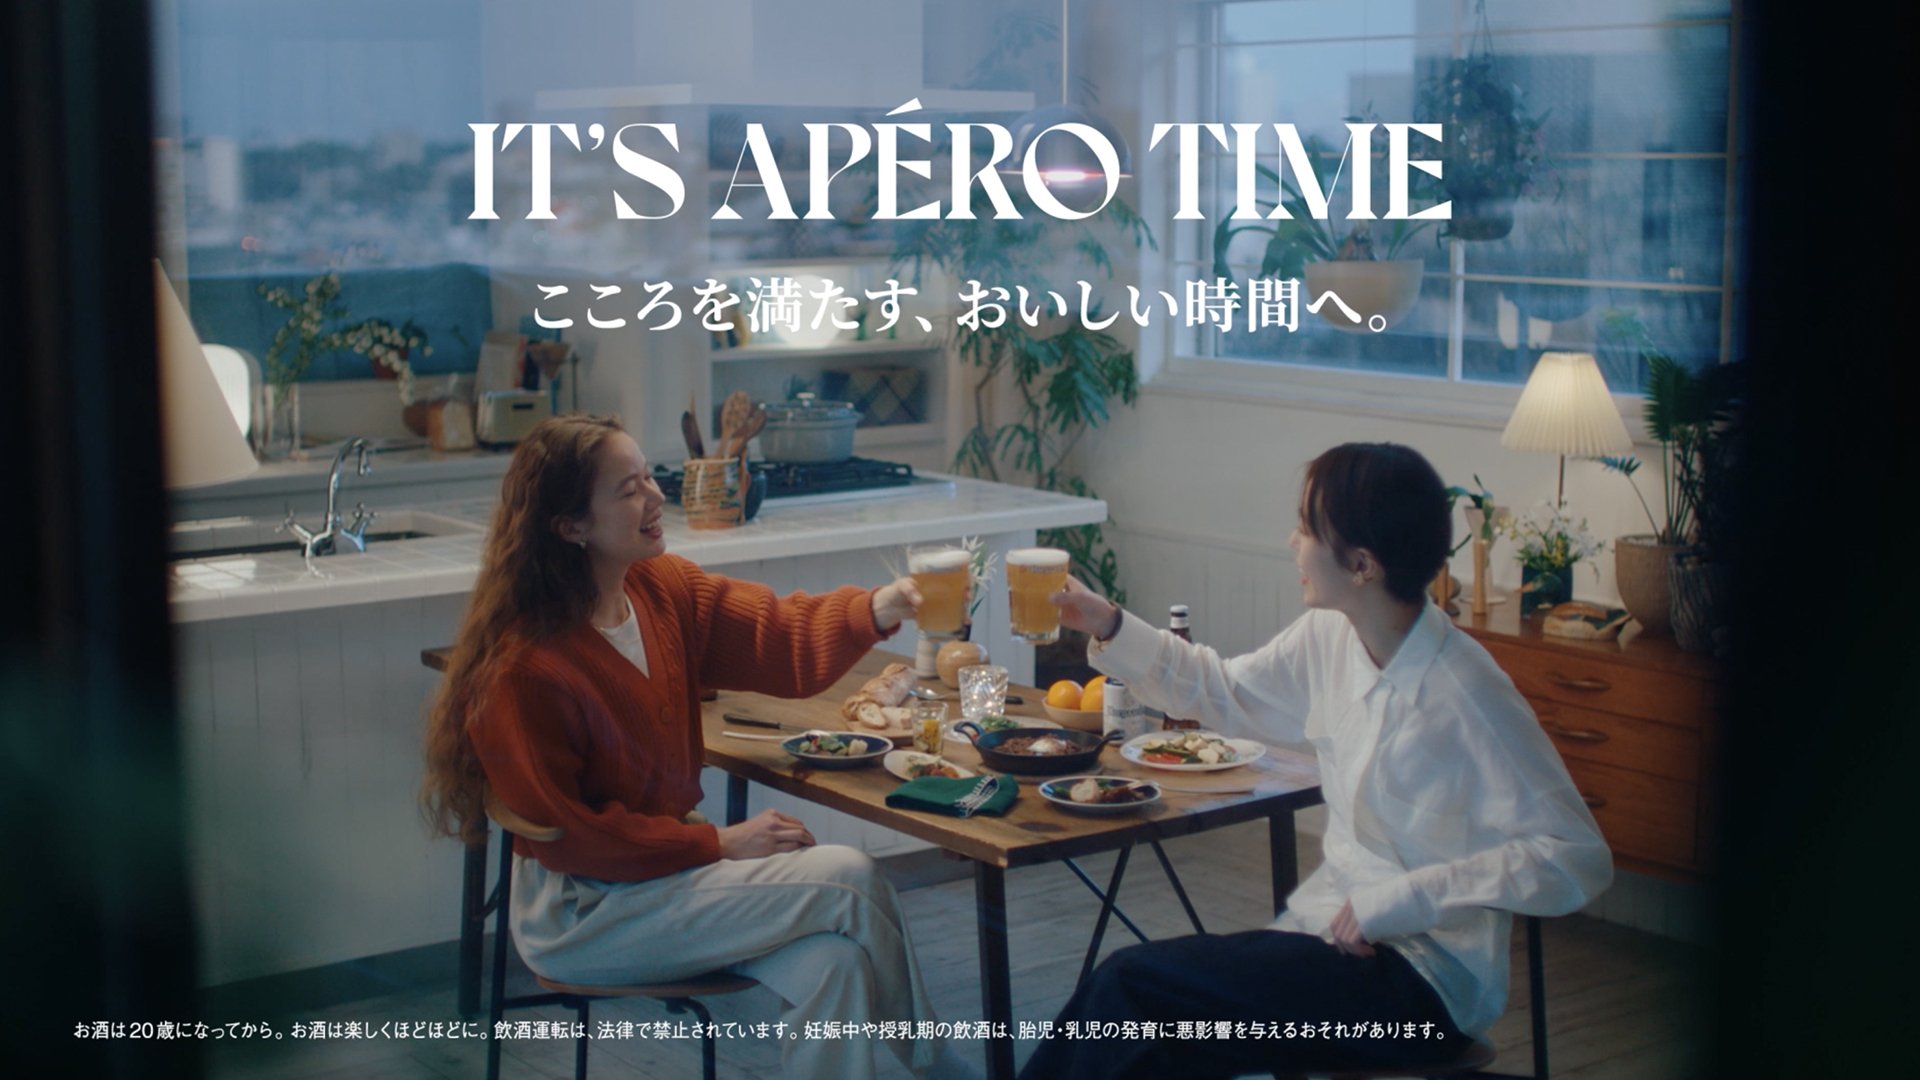 Hoegaarden "IT'S APERO TIME"キャンペーン クリエイティブ